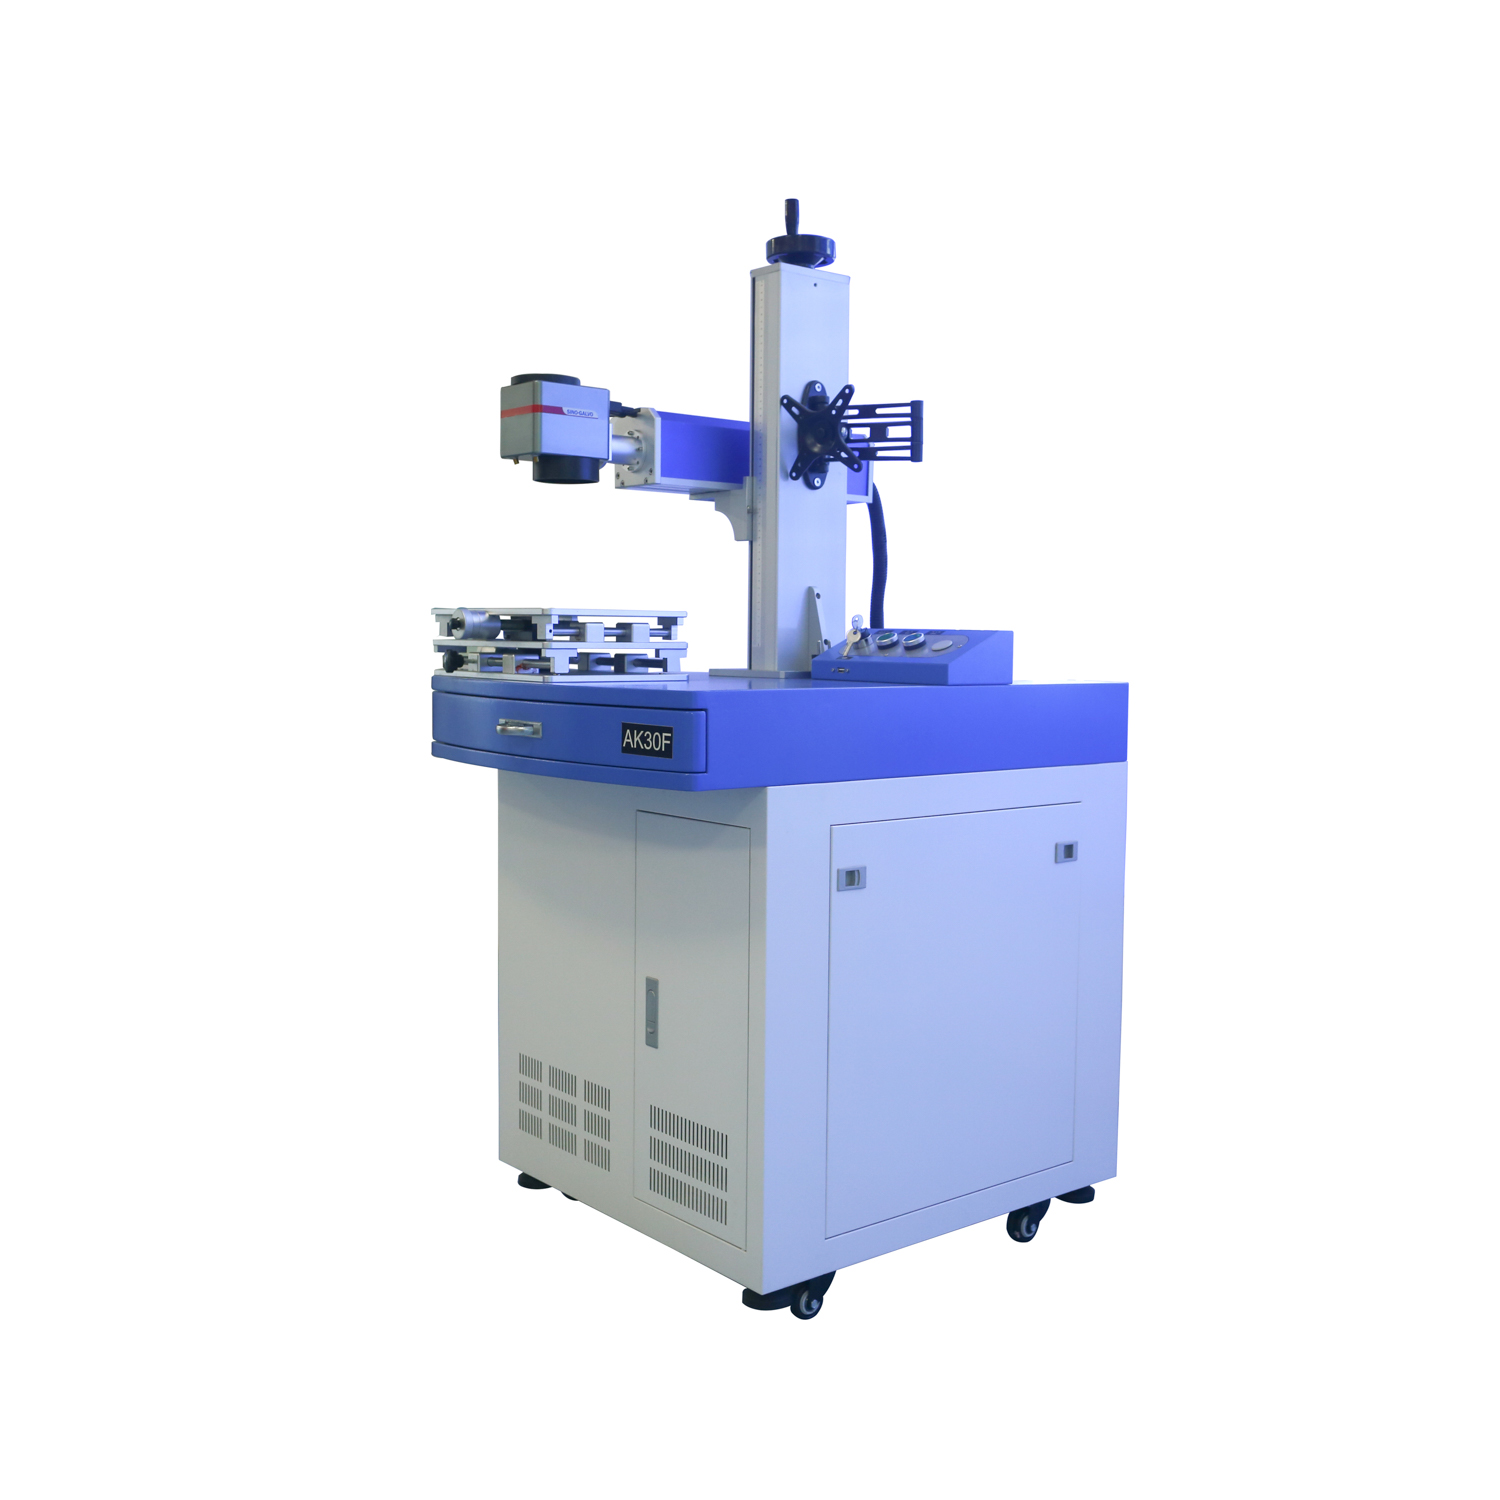 The function of the laser marking machine